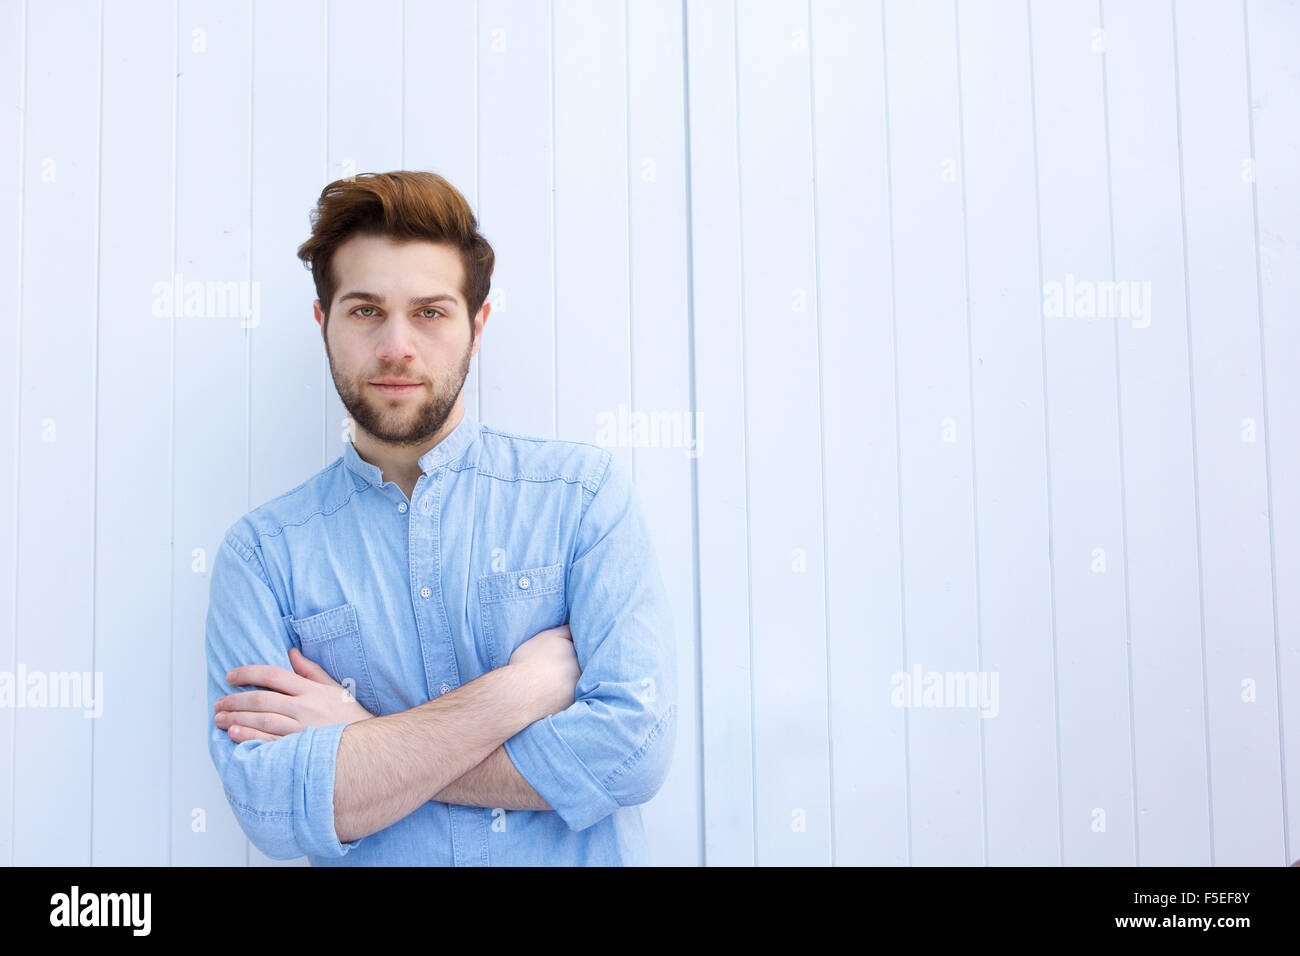 Portrait of a serious young modern man standing with arms crossed Stock Photo